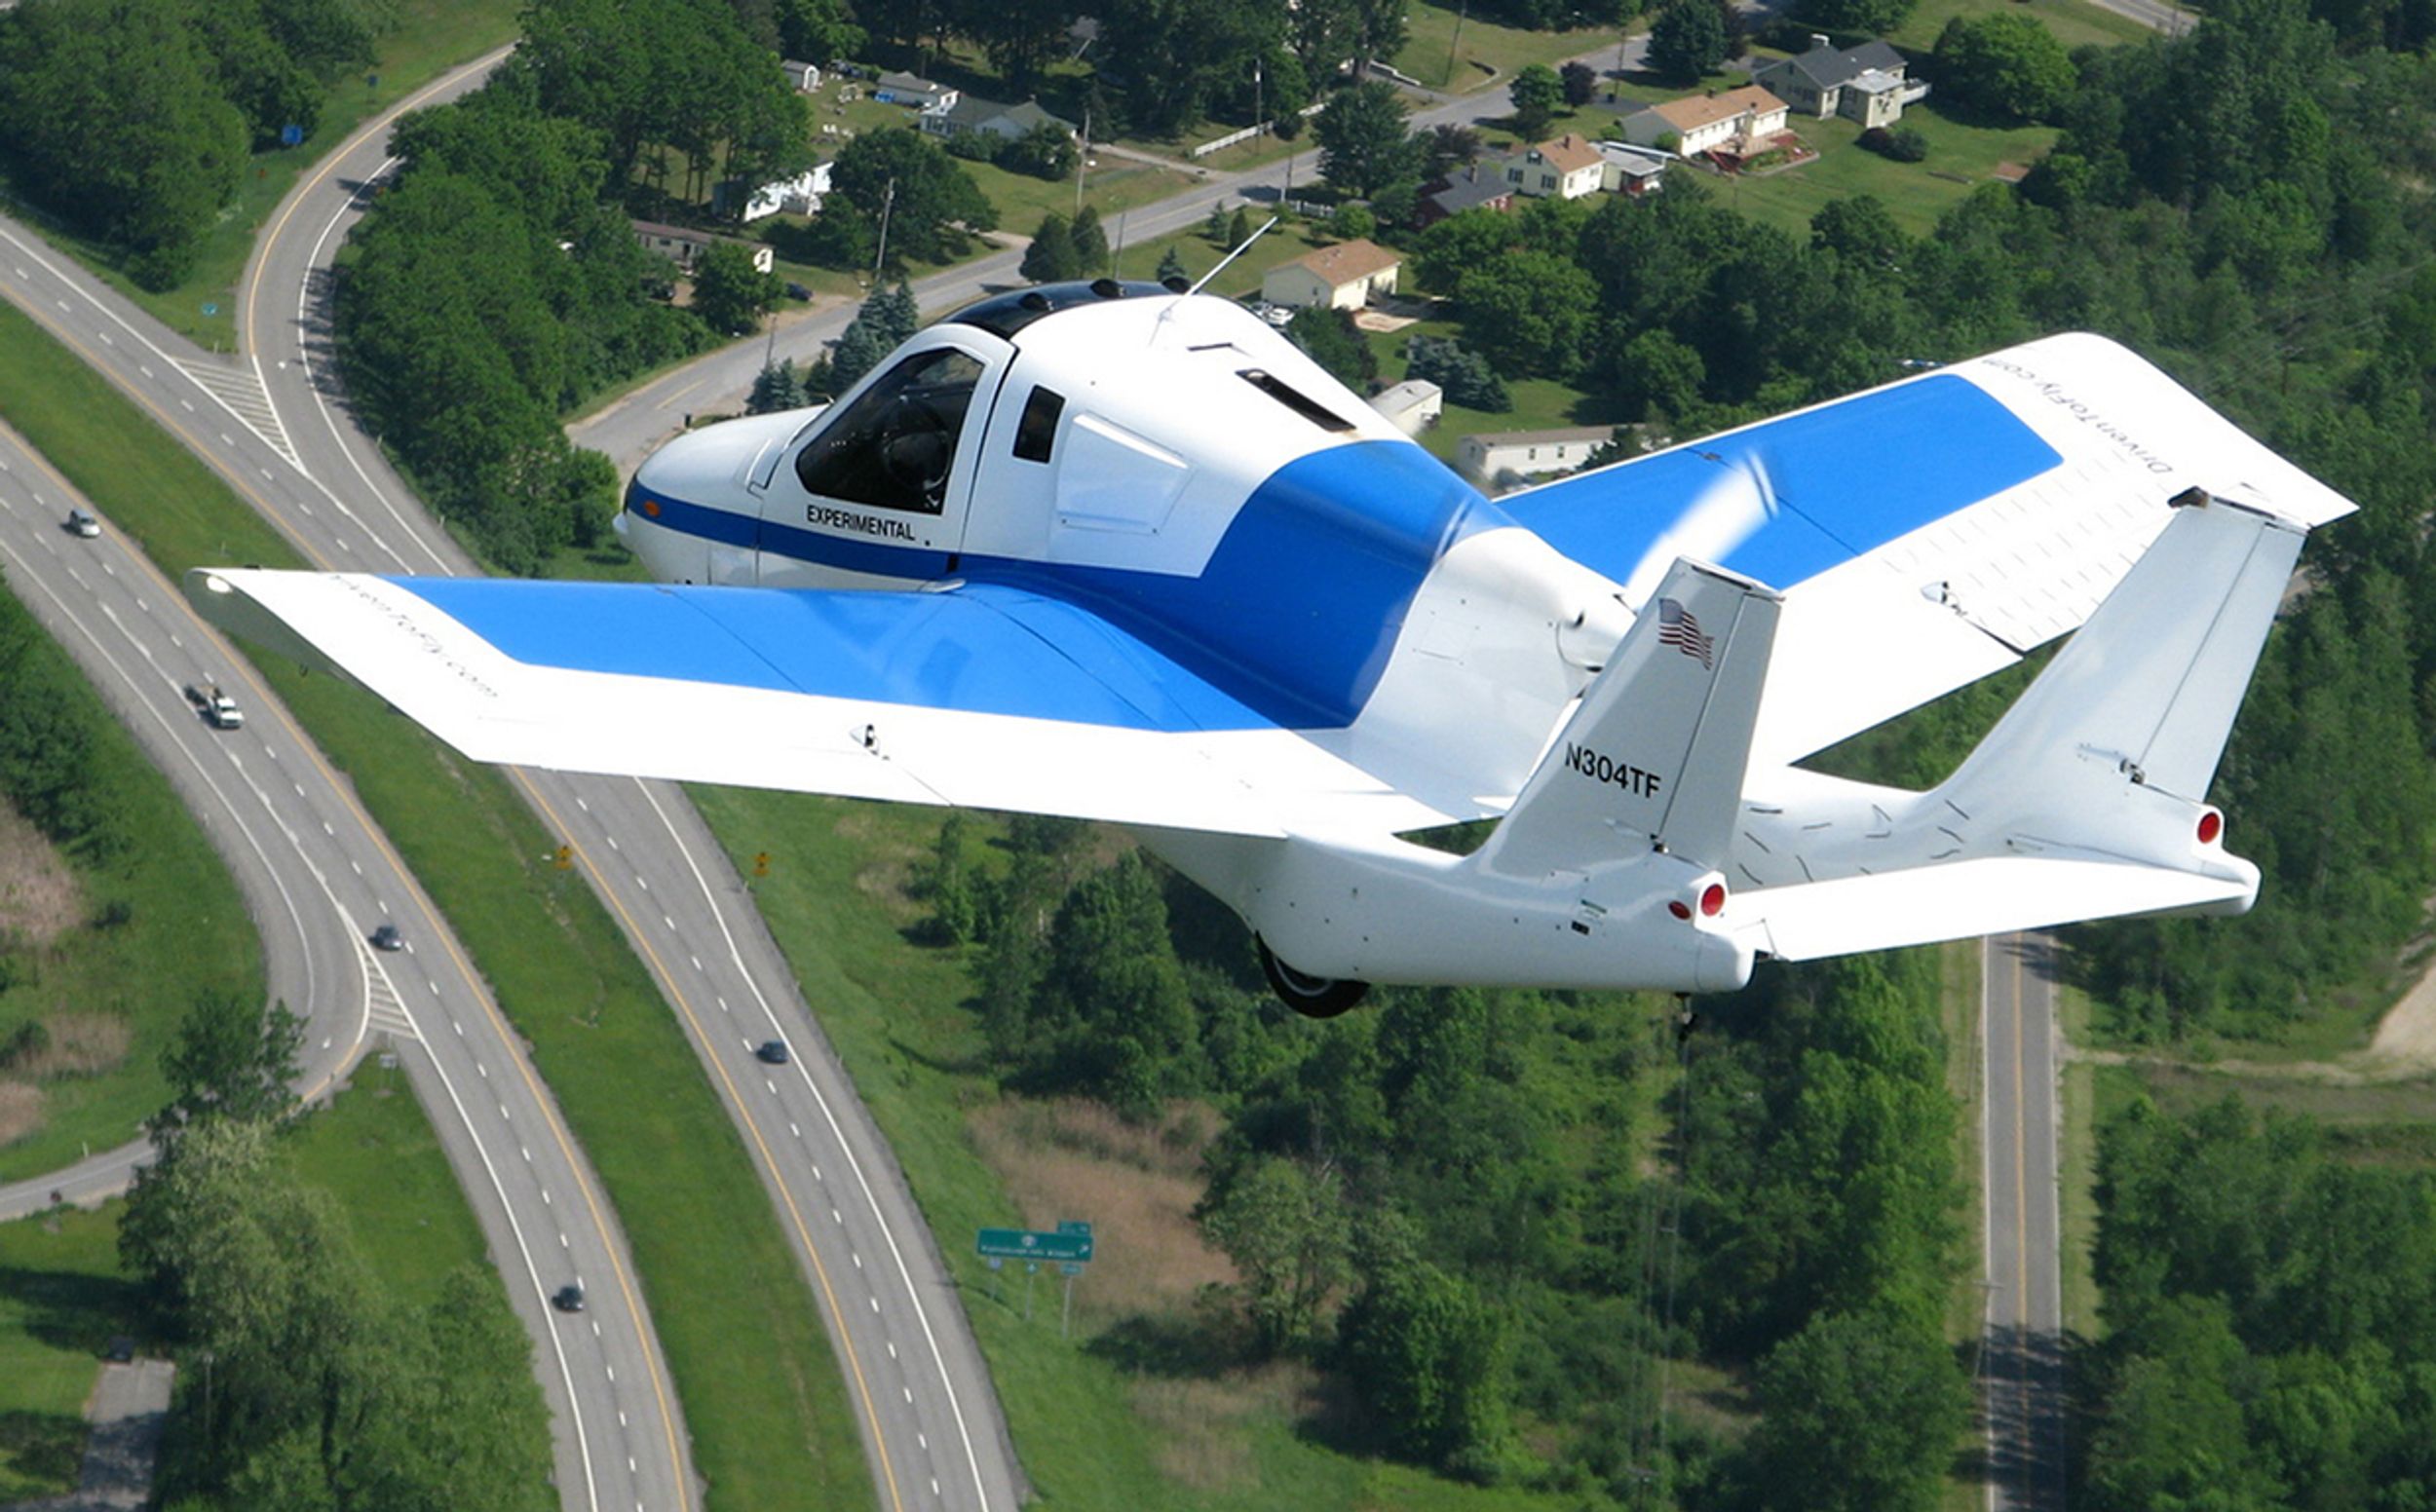 The Terrafugia flying car is seen in the air, with roads below.